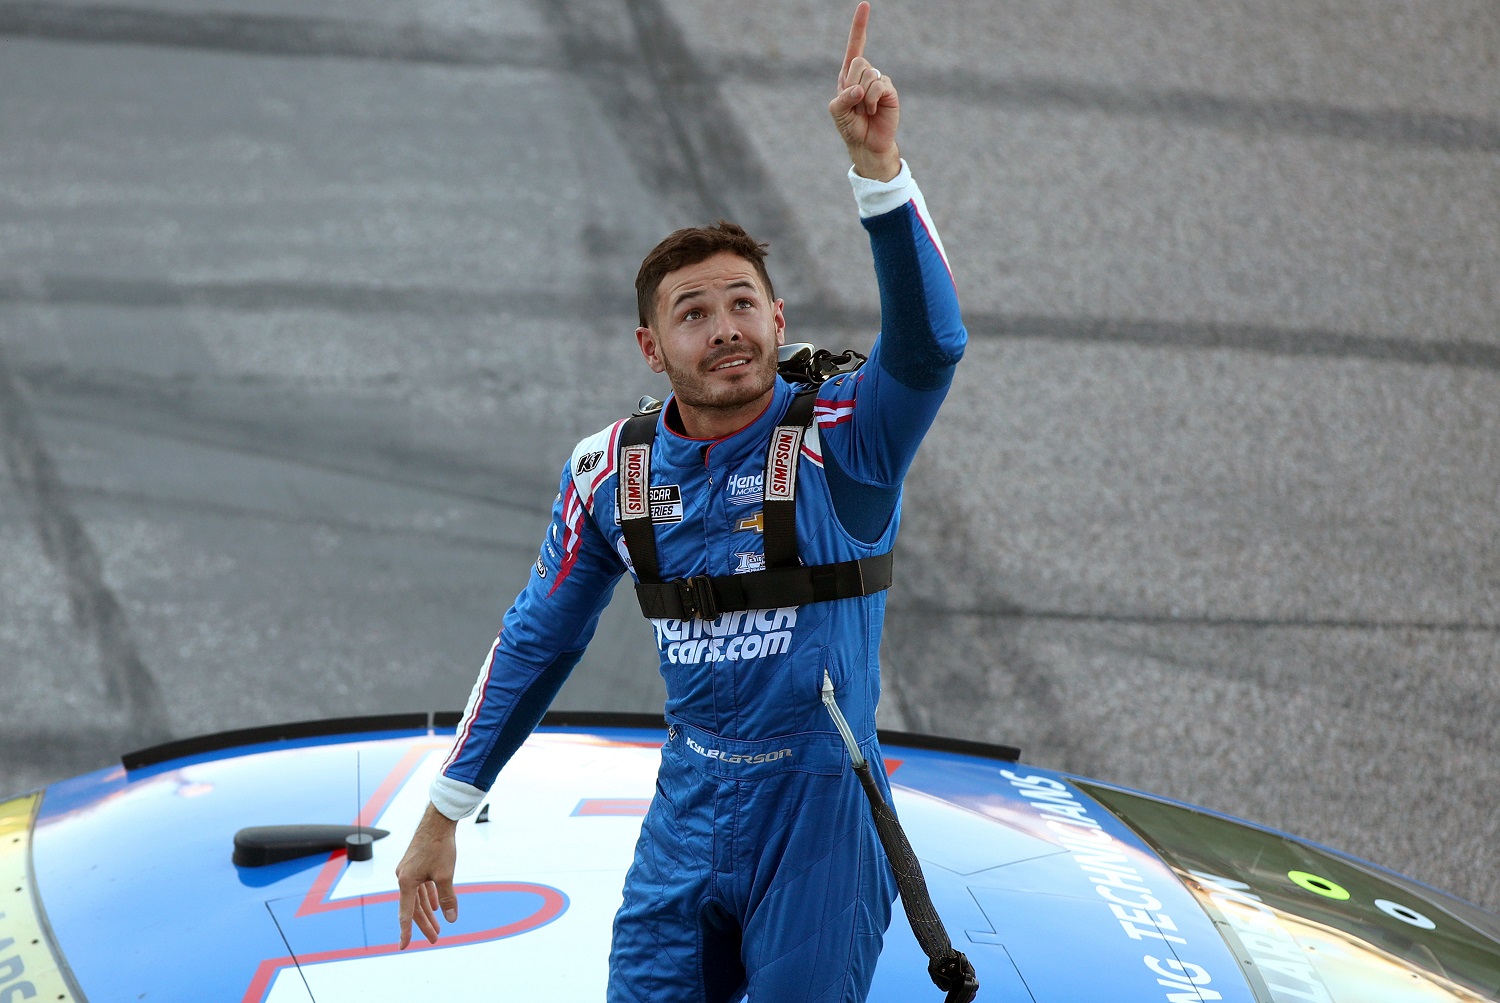 Kyle Larson, driver of the No. 5 Chevy, points toward the sky, as he celebrates winning the NASCAR Cup Series Hollywood Casino 400 at Kansas Speedway on Oct. 24, 2021